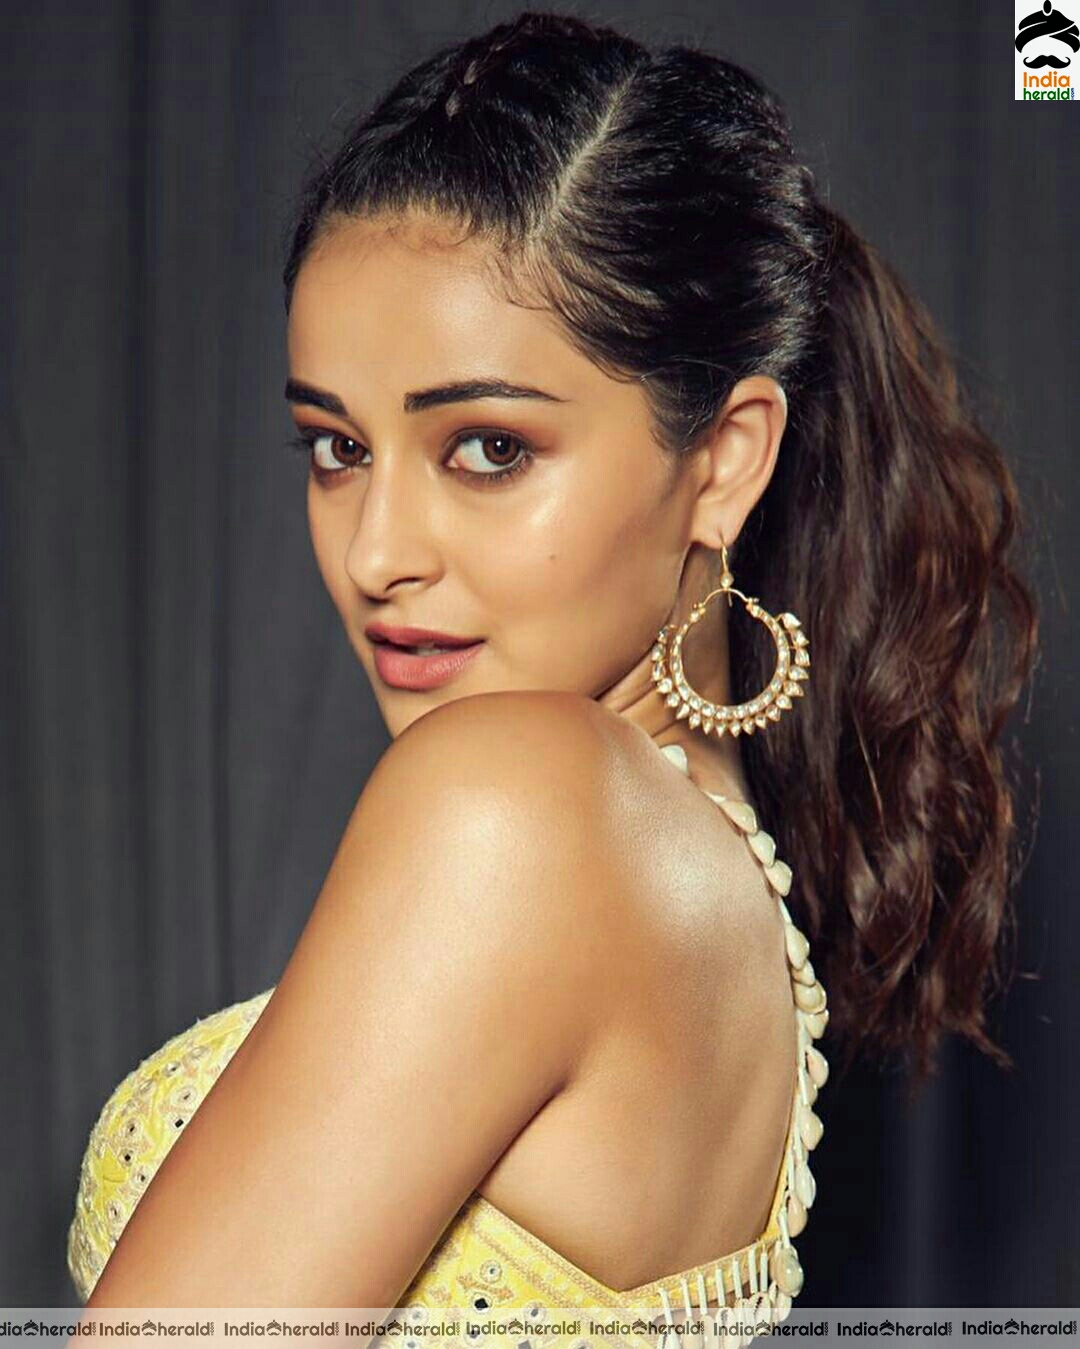 Ananya Pandey Shows Her Sexy Waist In These Photoshoot